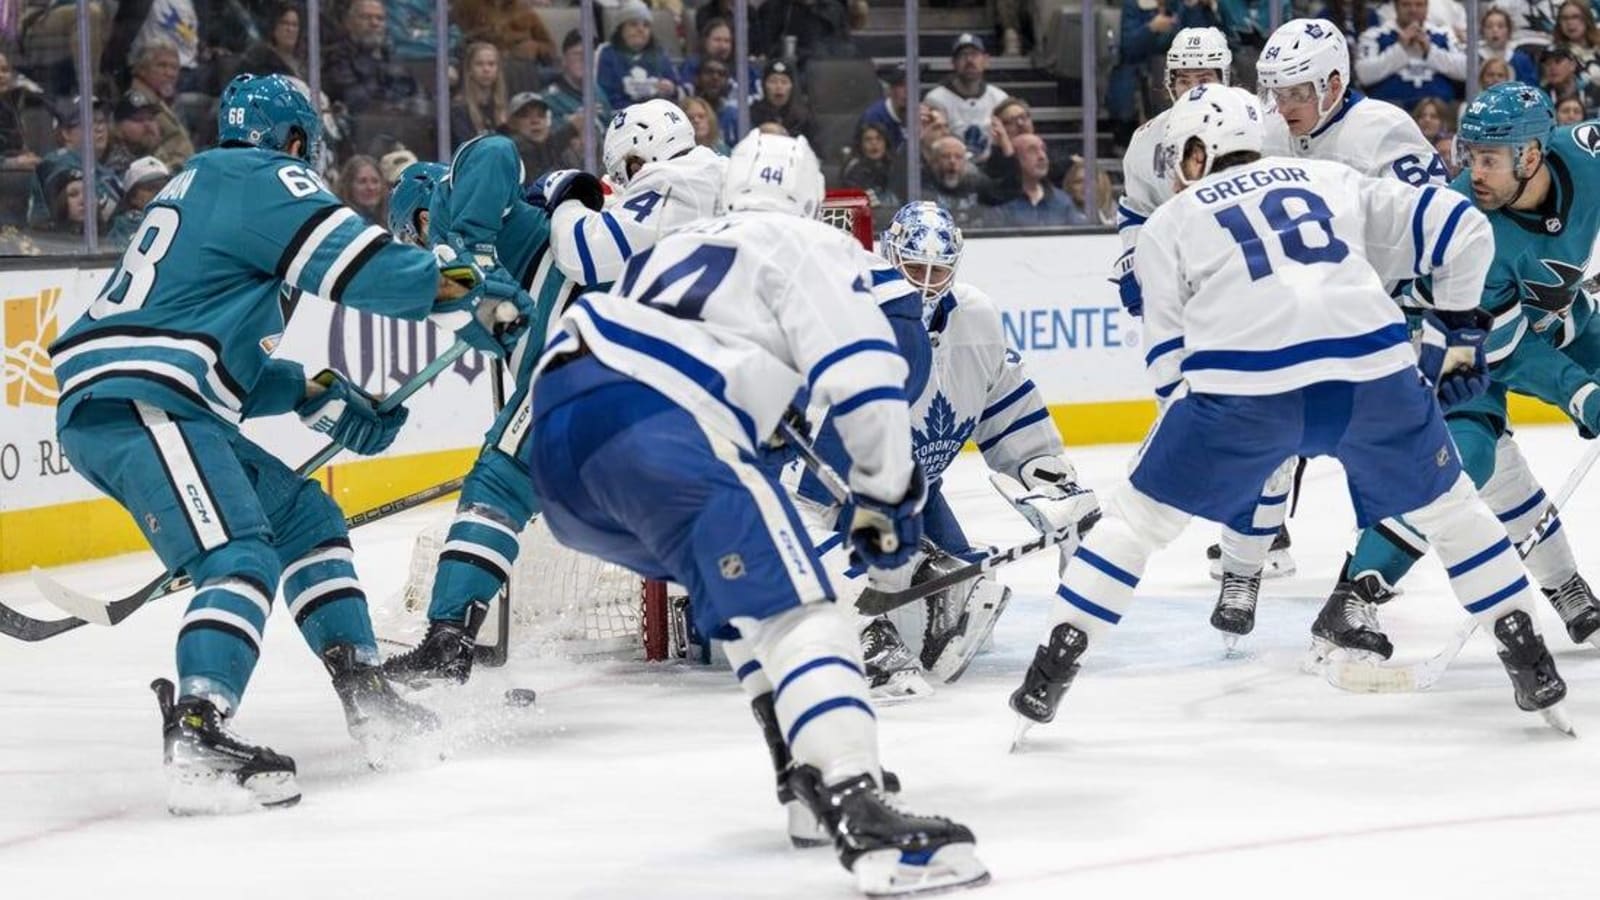 Leafs cruise, send Sharks to 11th straight loss